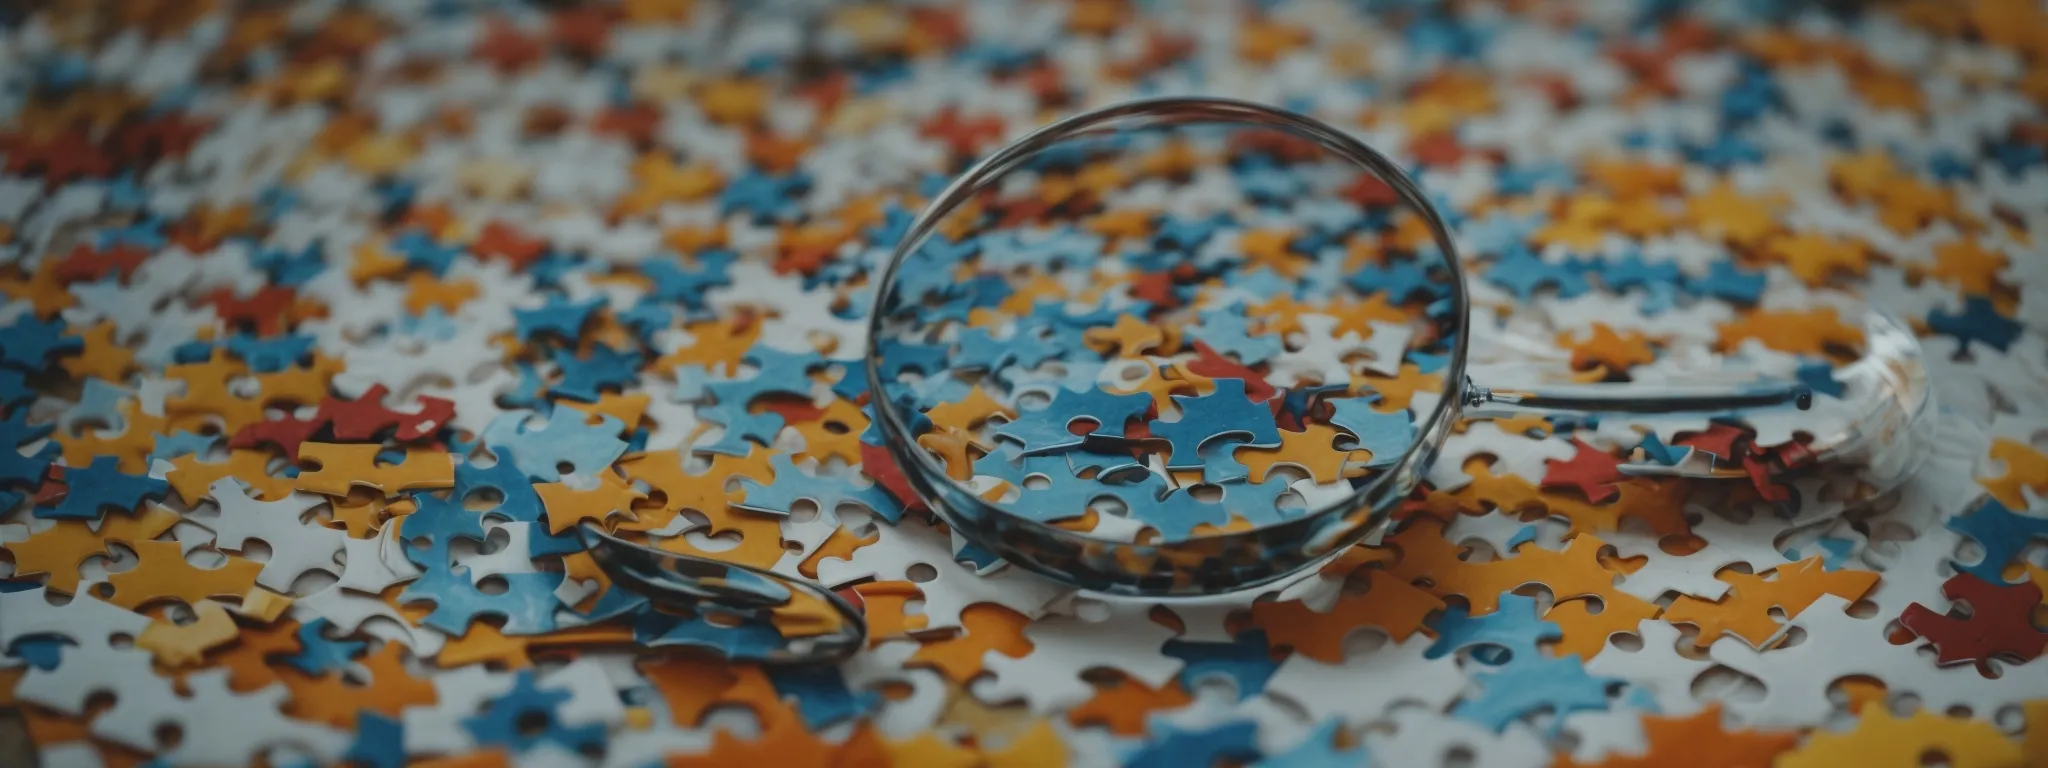 a magnifying glass hovering over a jigsaw puzzle with missing pieces.